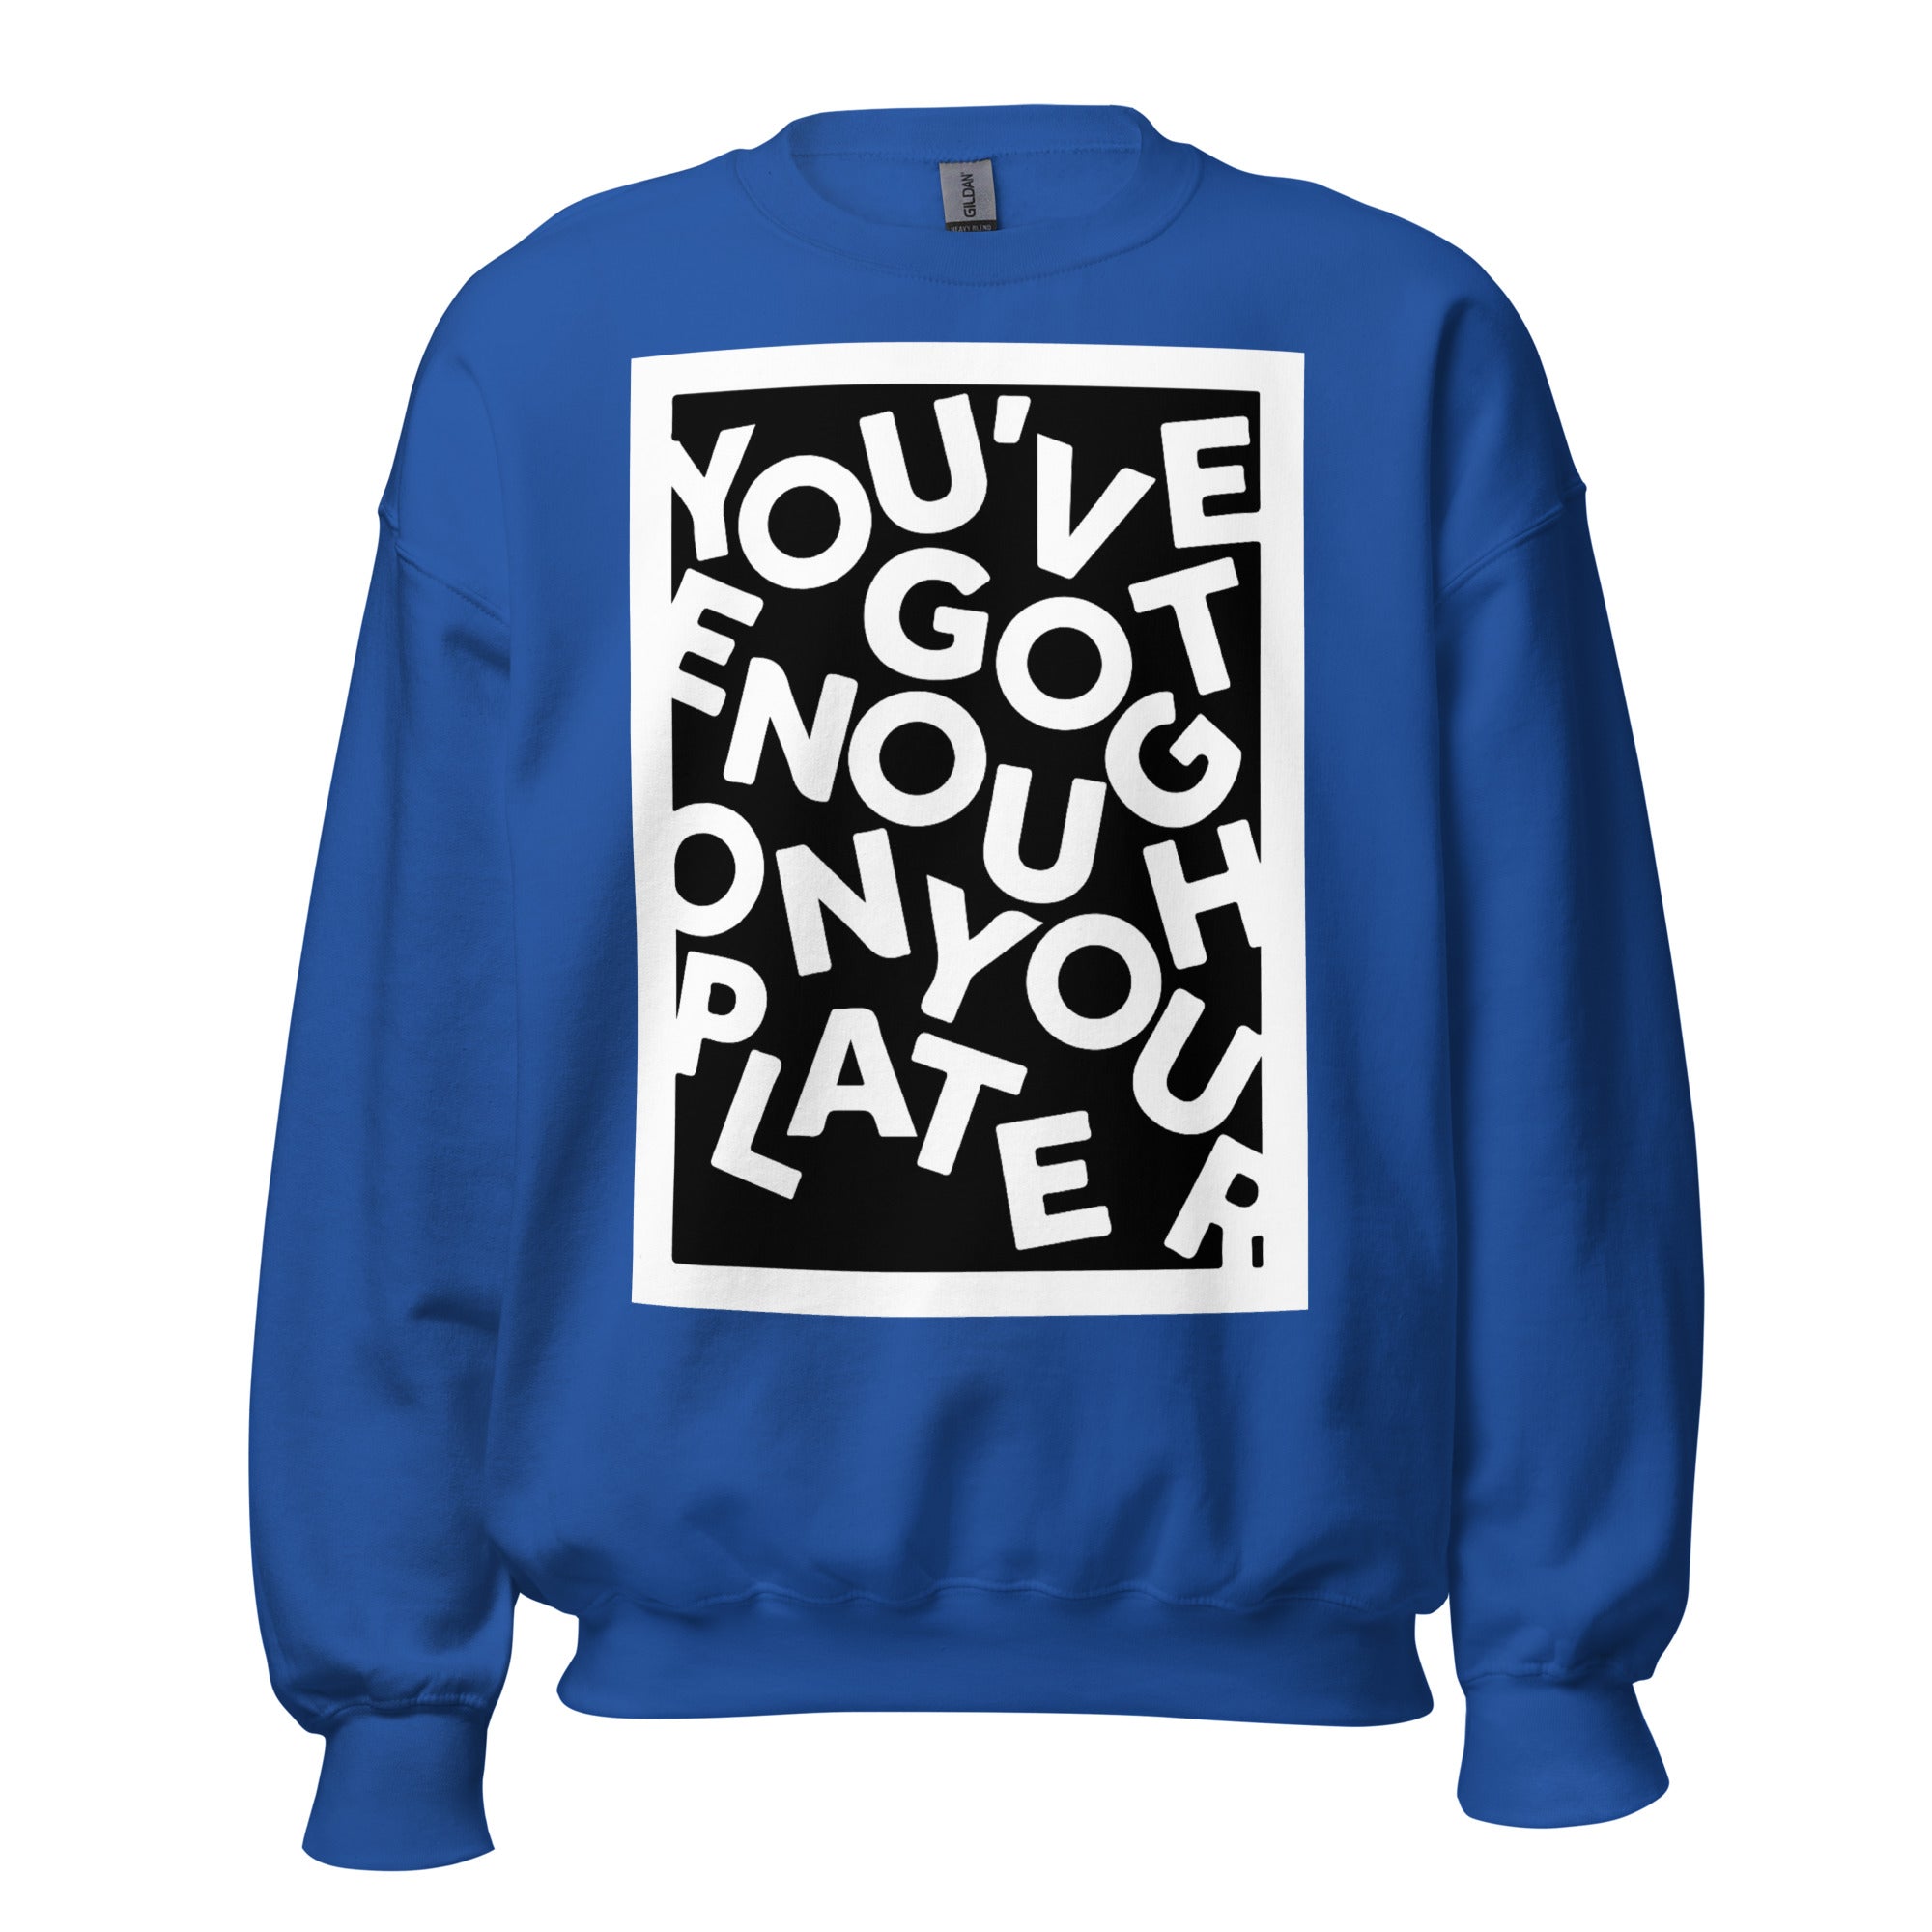 Unisex Crew Neck Sweatshirt - You've Got Enough On Your Plate - GRAPHIC T-SHIRTS